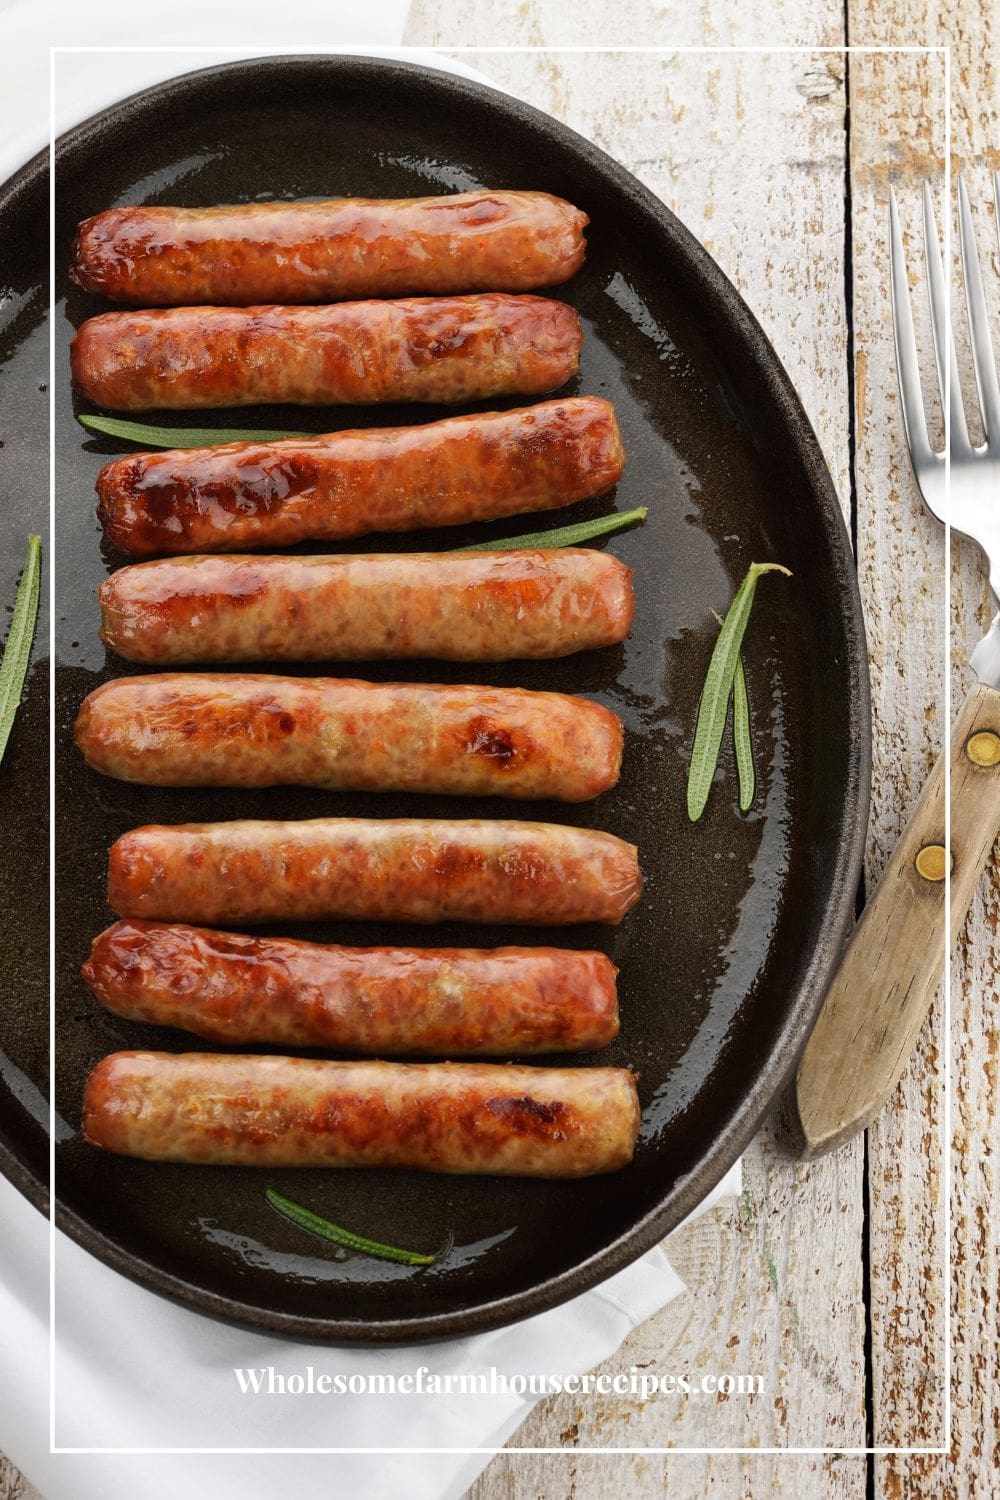 Oven-baked Sausage Links